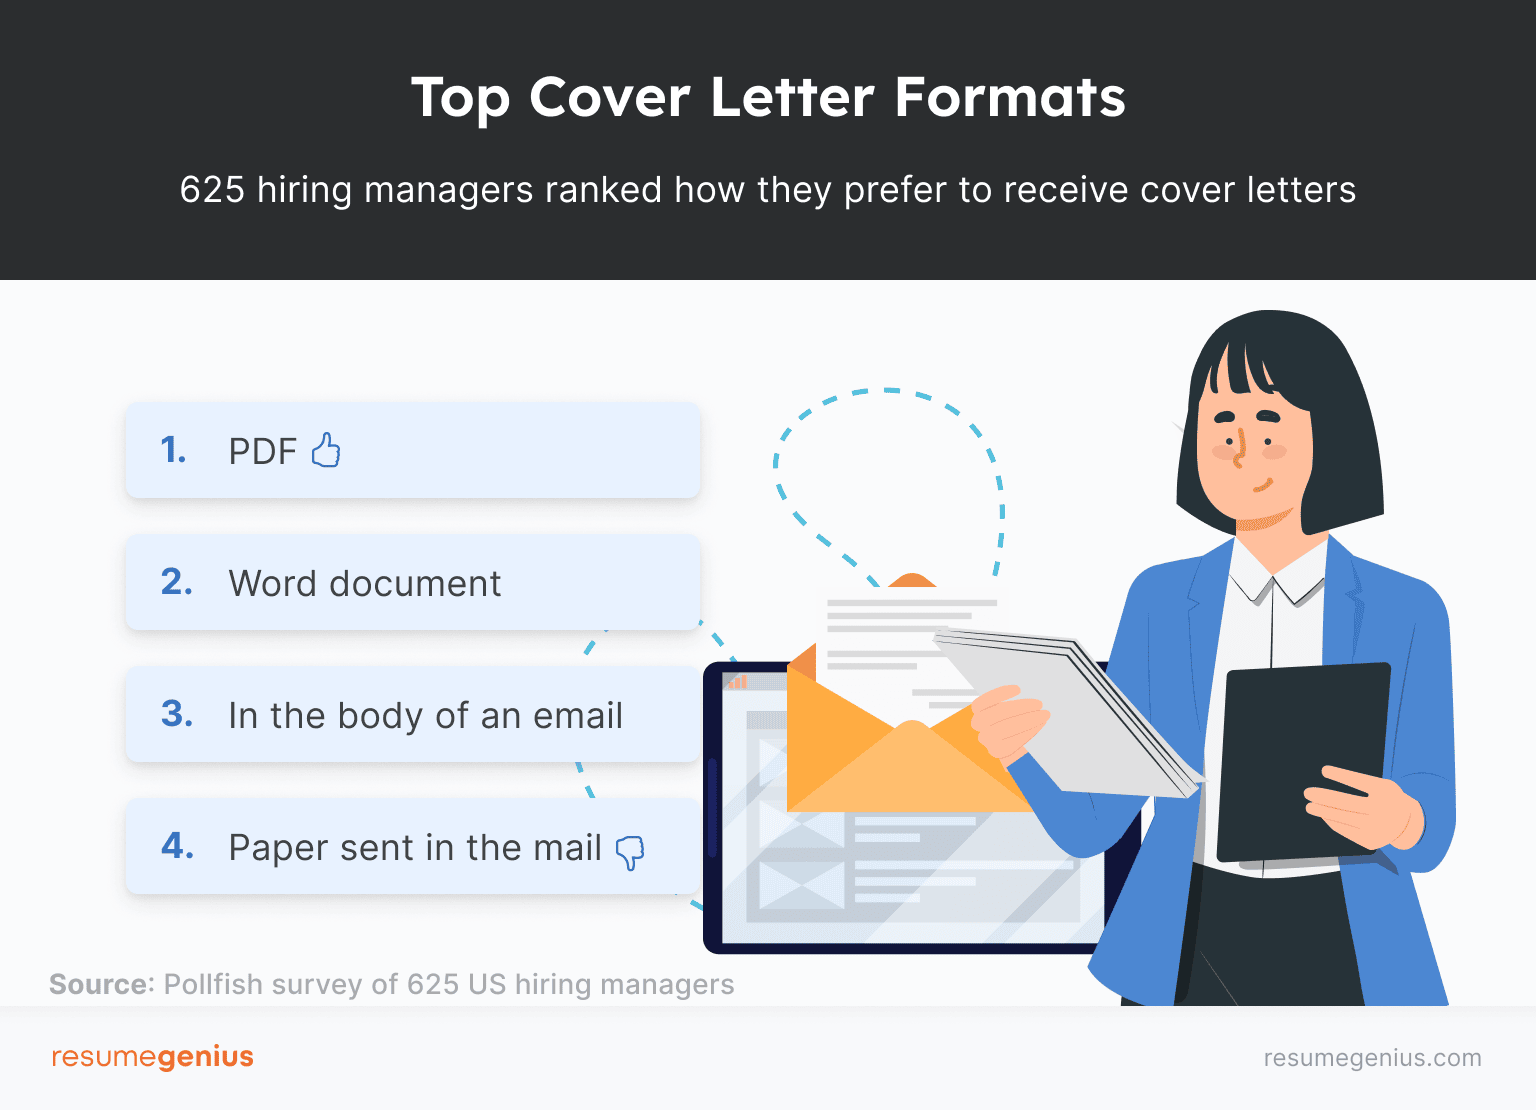 Rankings of different ways to submit a cover letter according to a Resume Genius survey of hiring managers